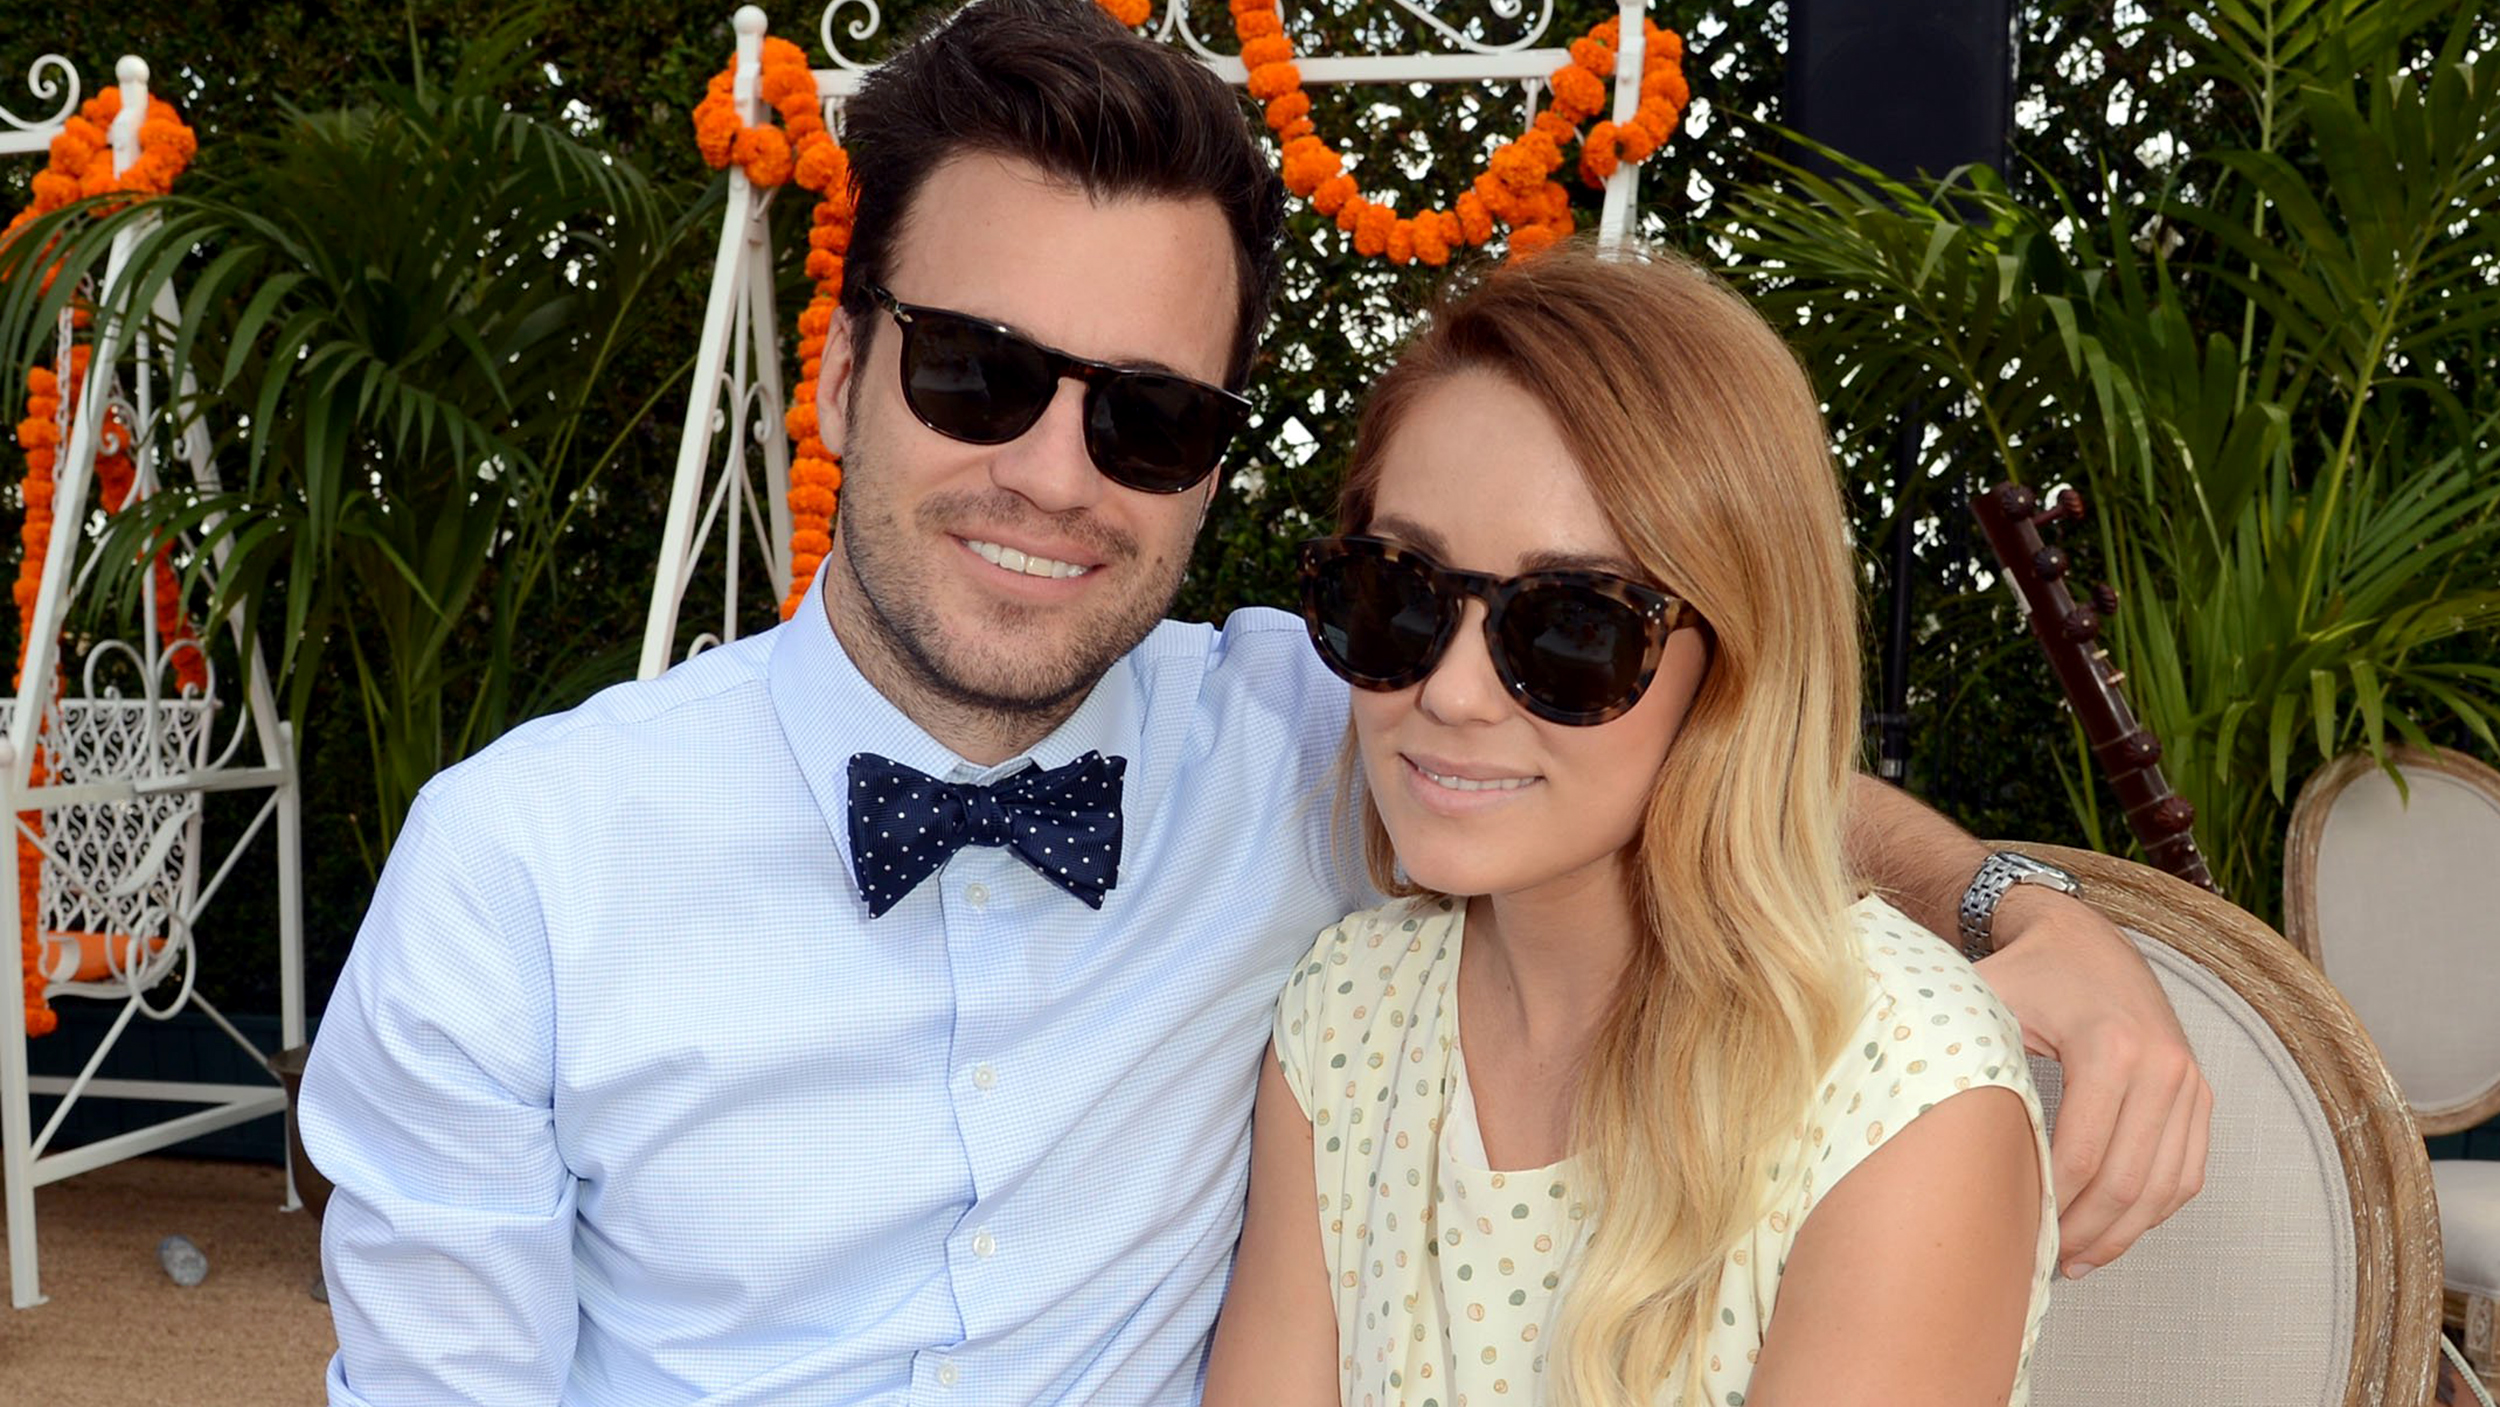 Lauren Conrad weds William Tell in California wedding surrounded by those  they 'love most